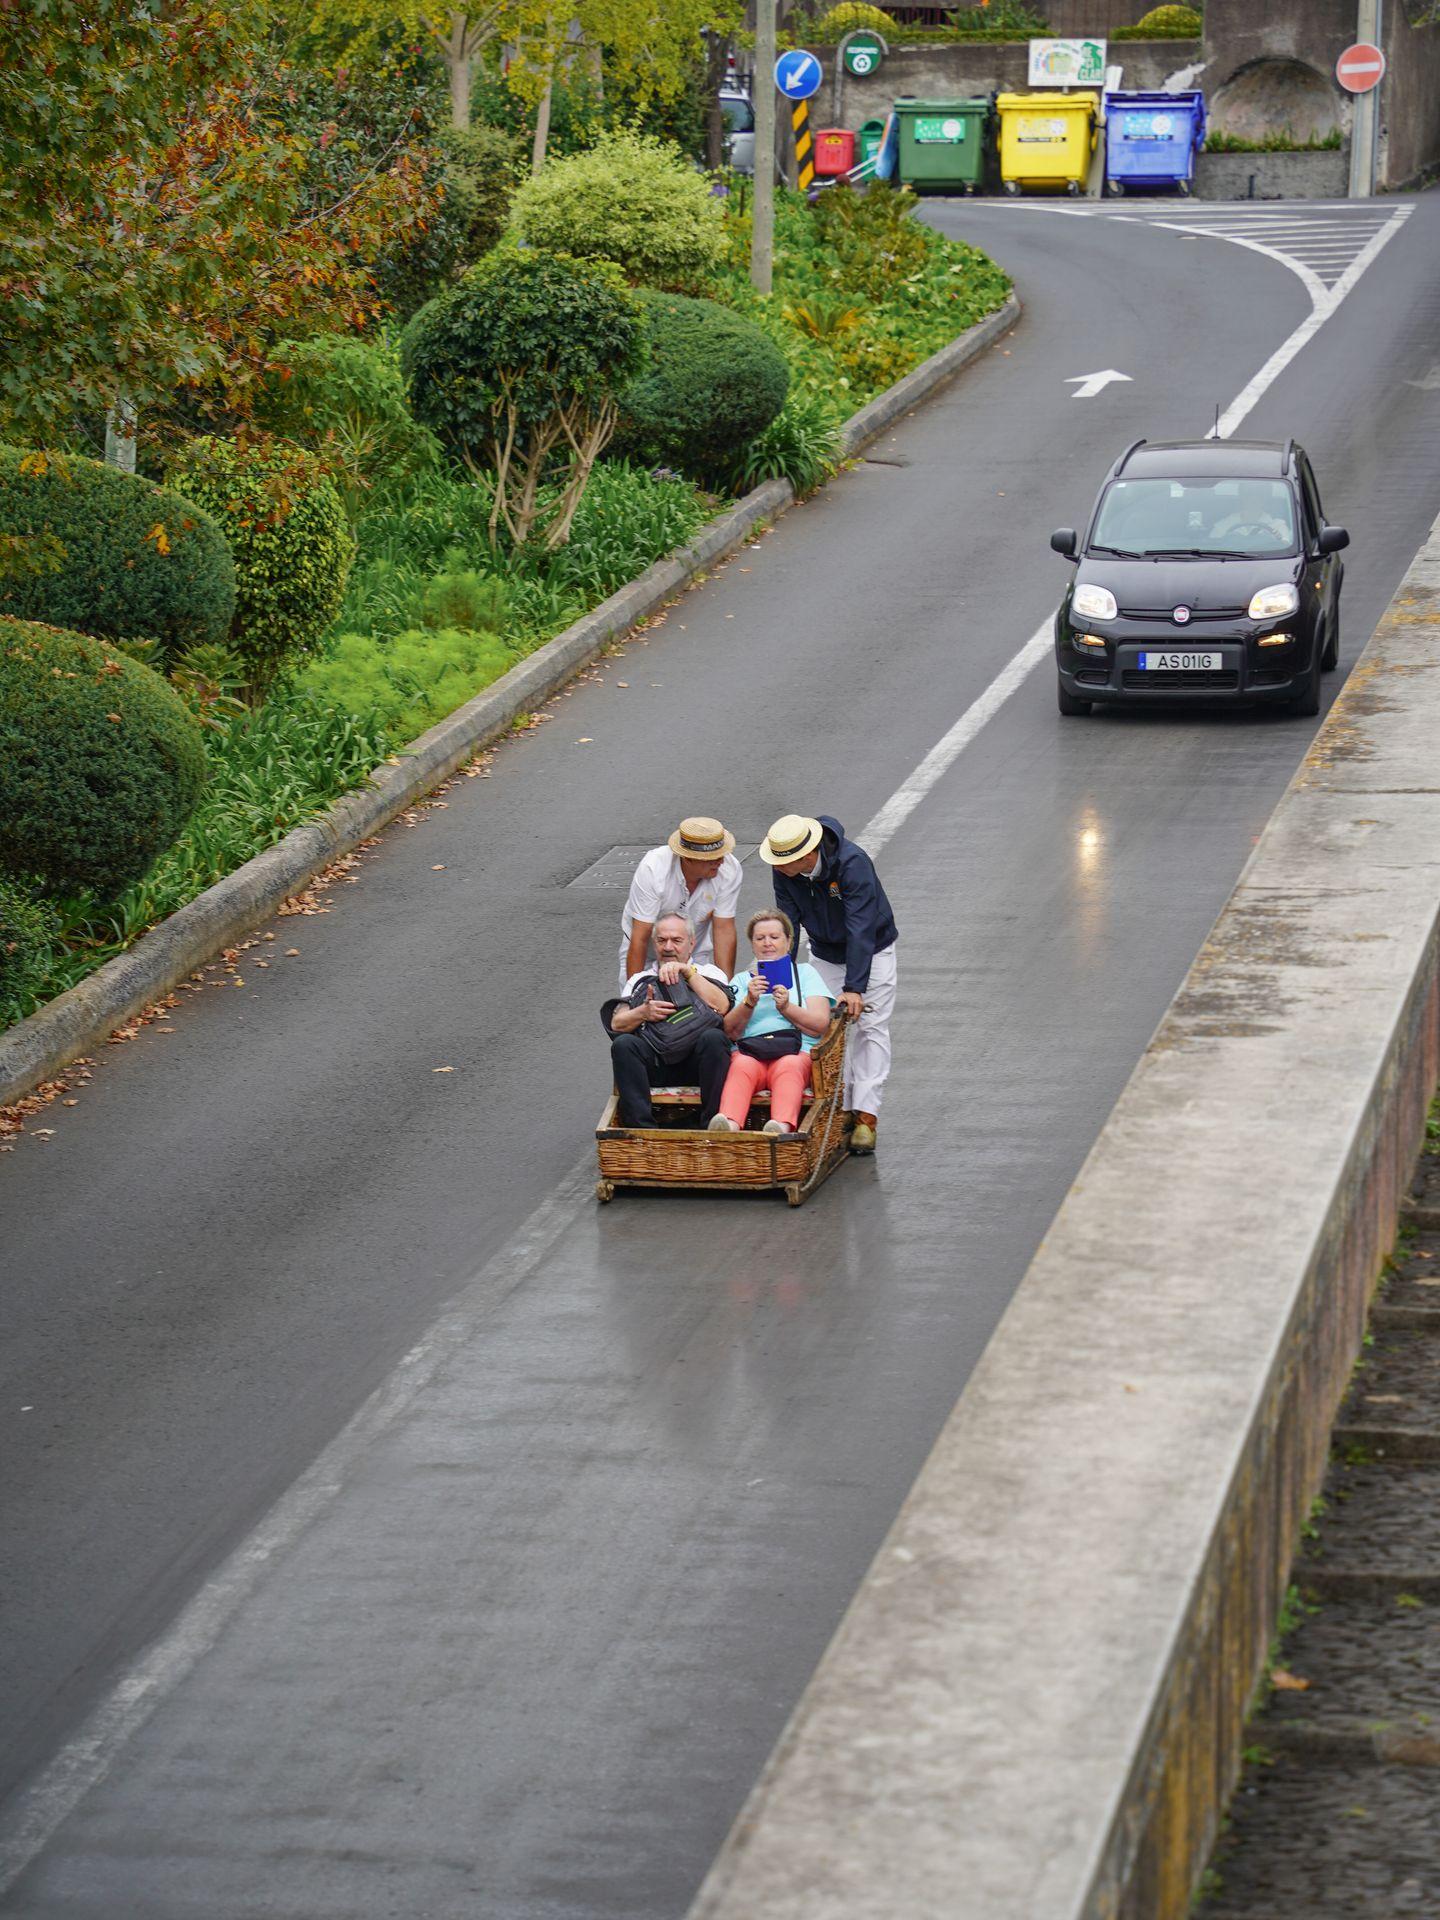 People being pushed in a wicker basket on a steep road.